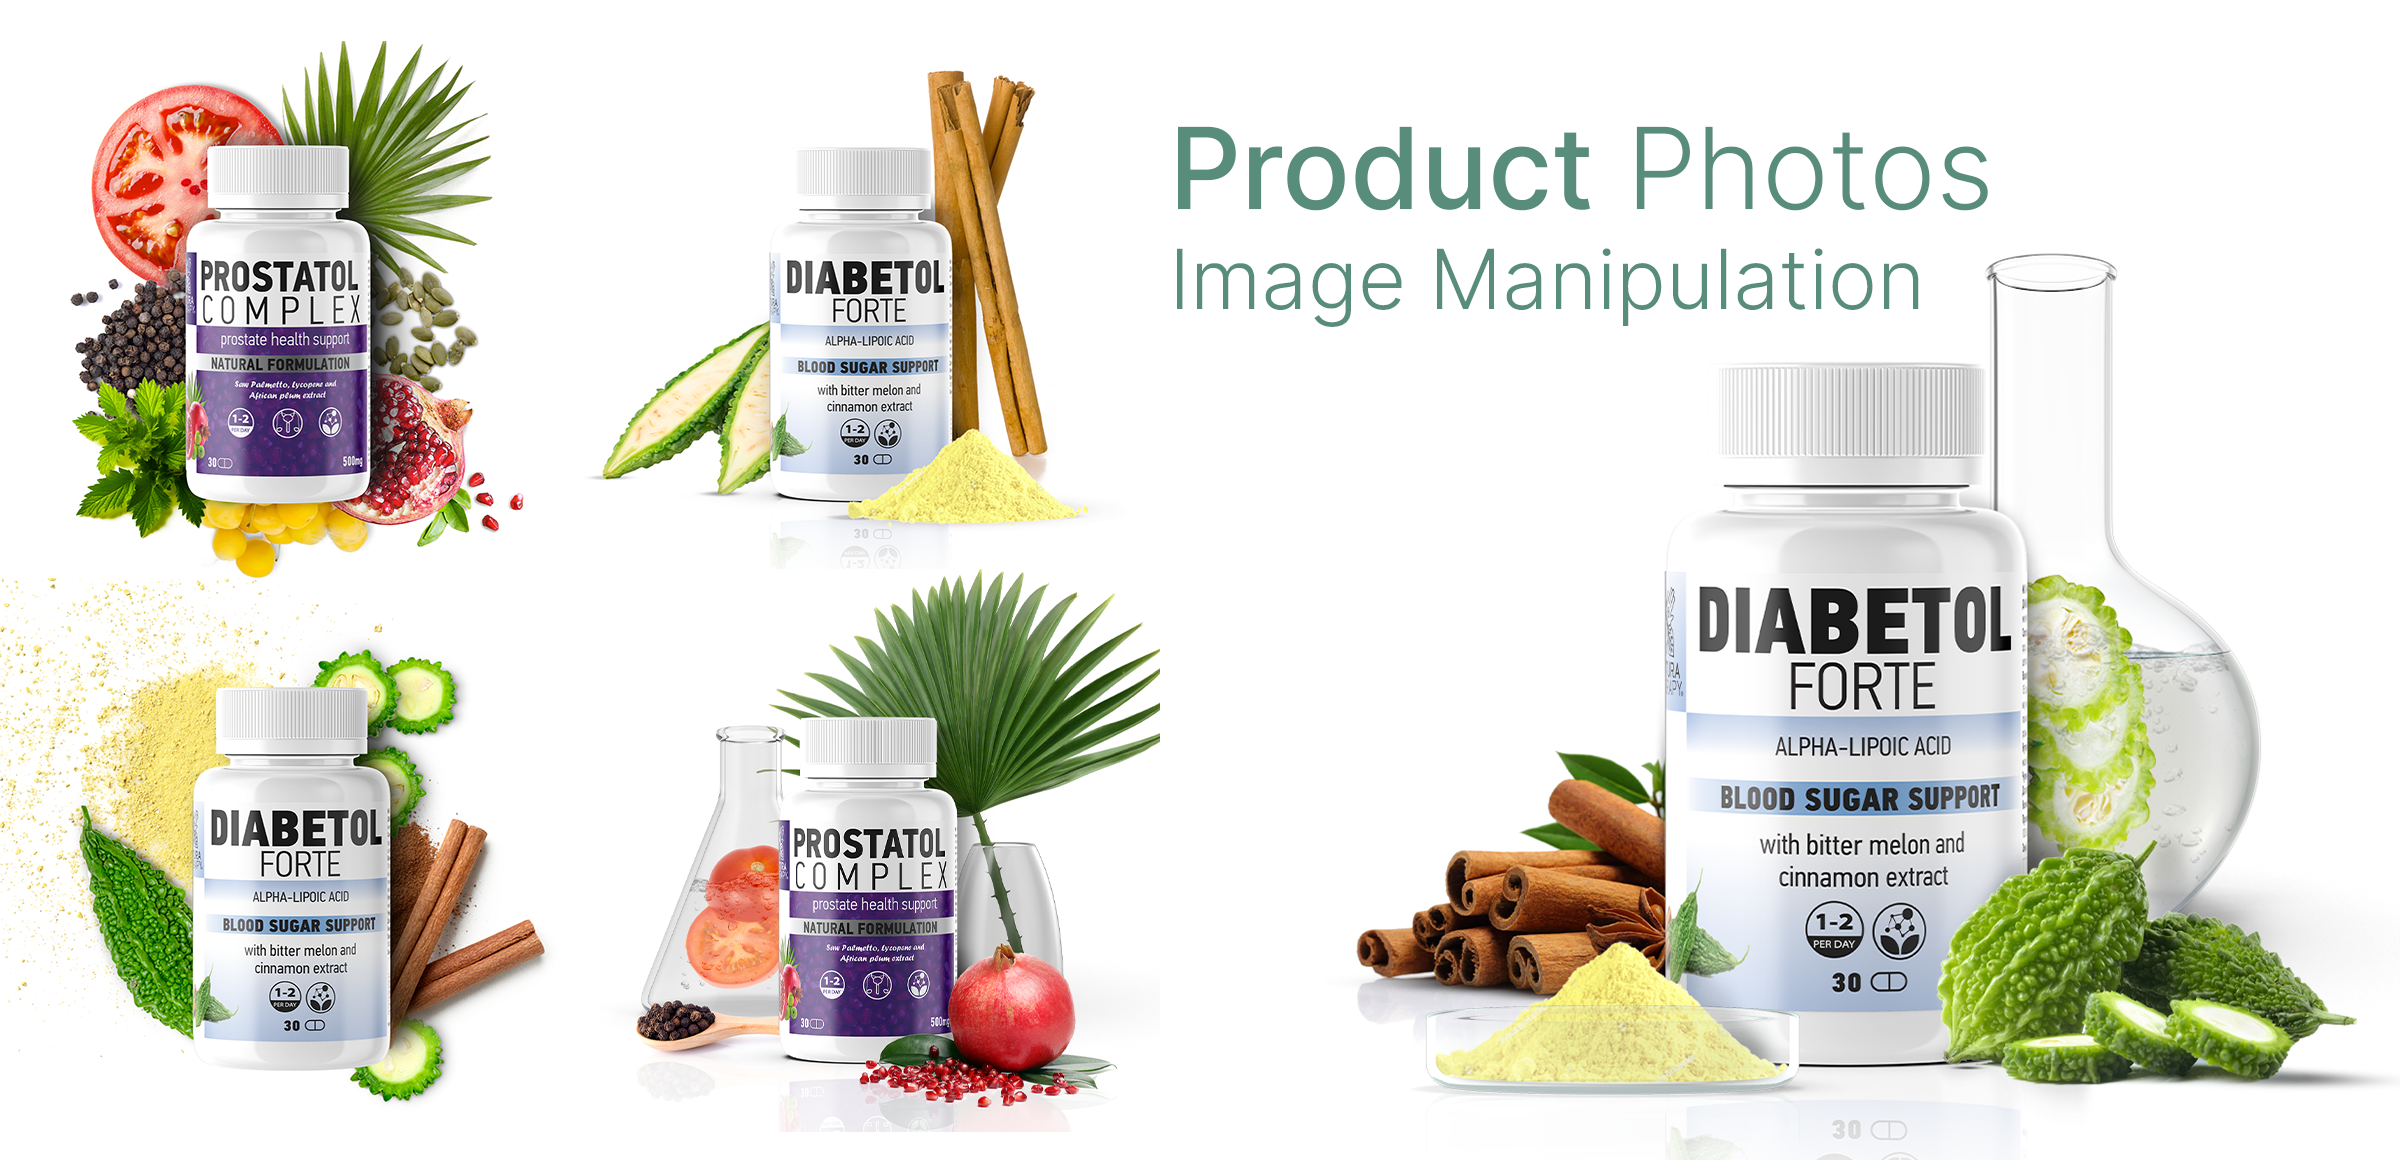 Product photos with their ingredients, made with photomanipulation